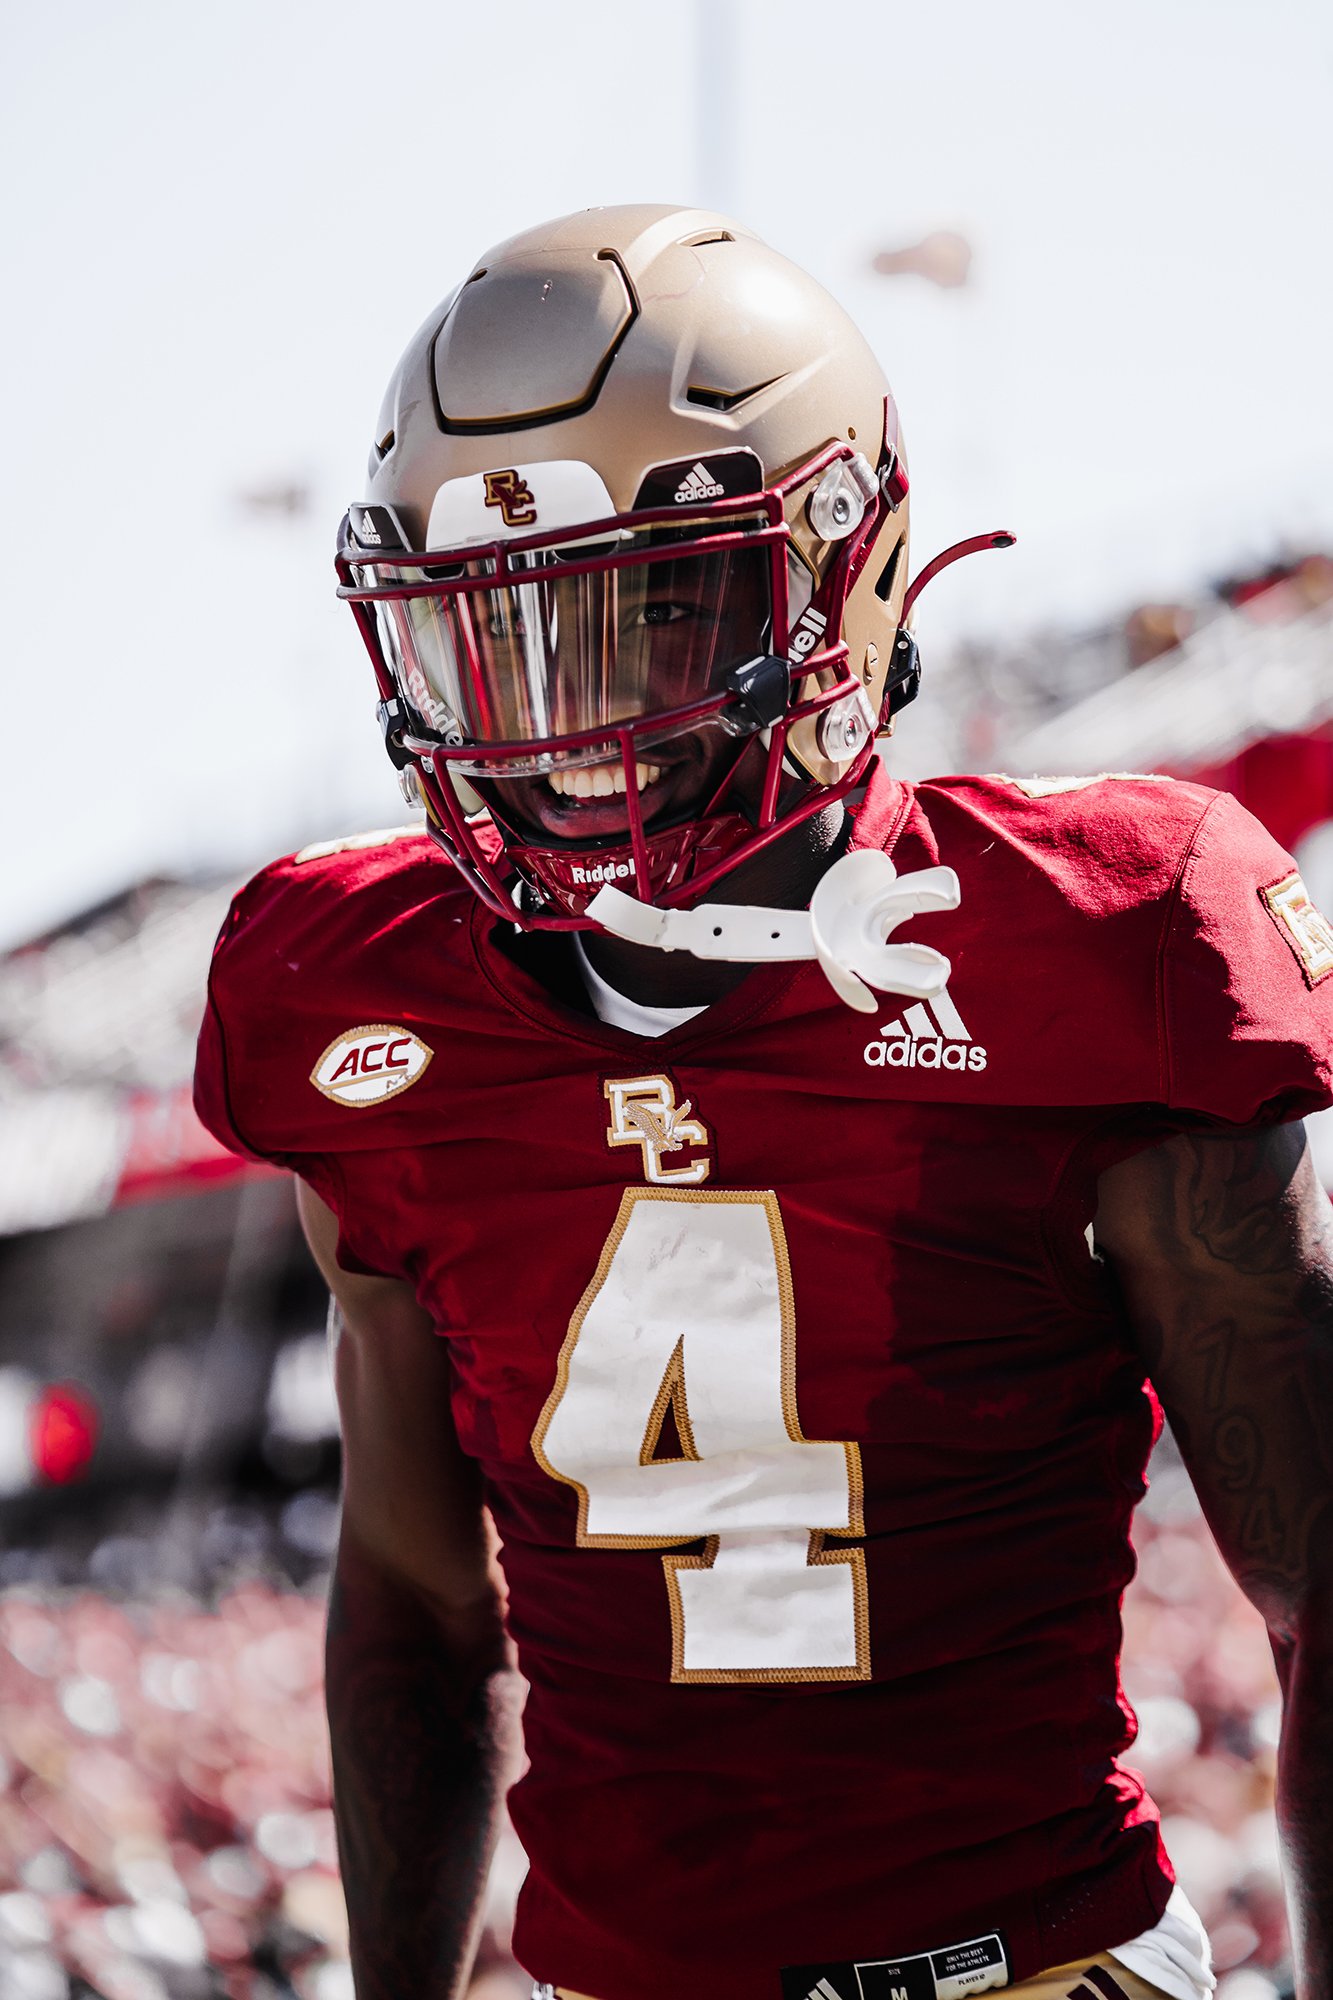 Boston College Football a day Zay! Second half for Flowers and the Eagles coming up next on ACC Network